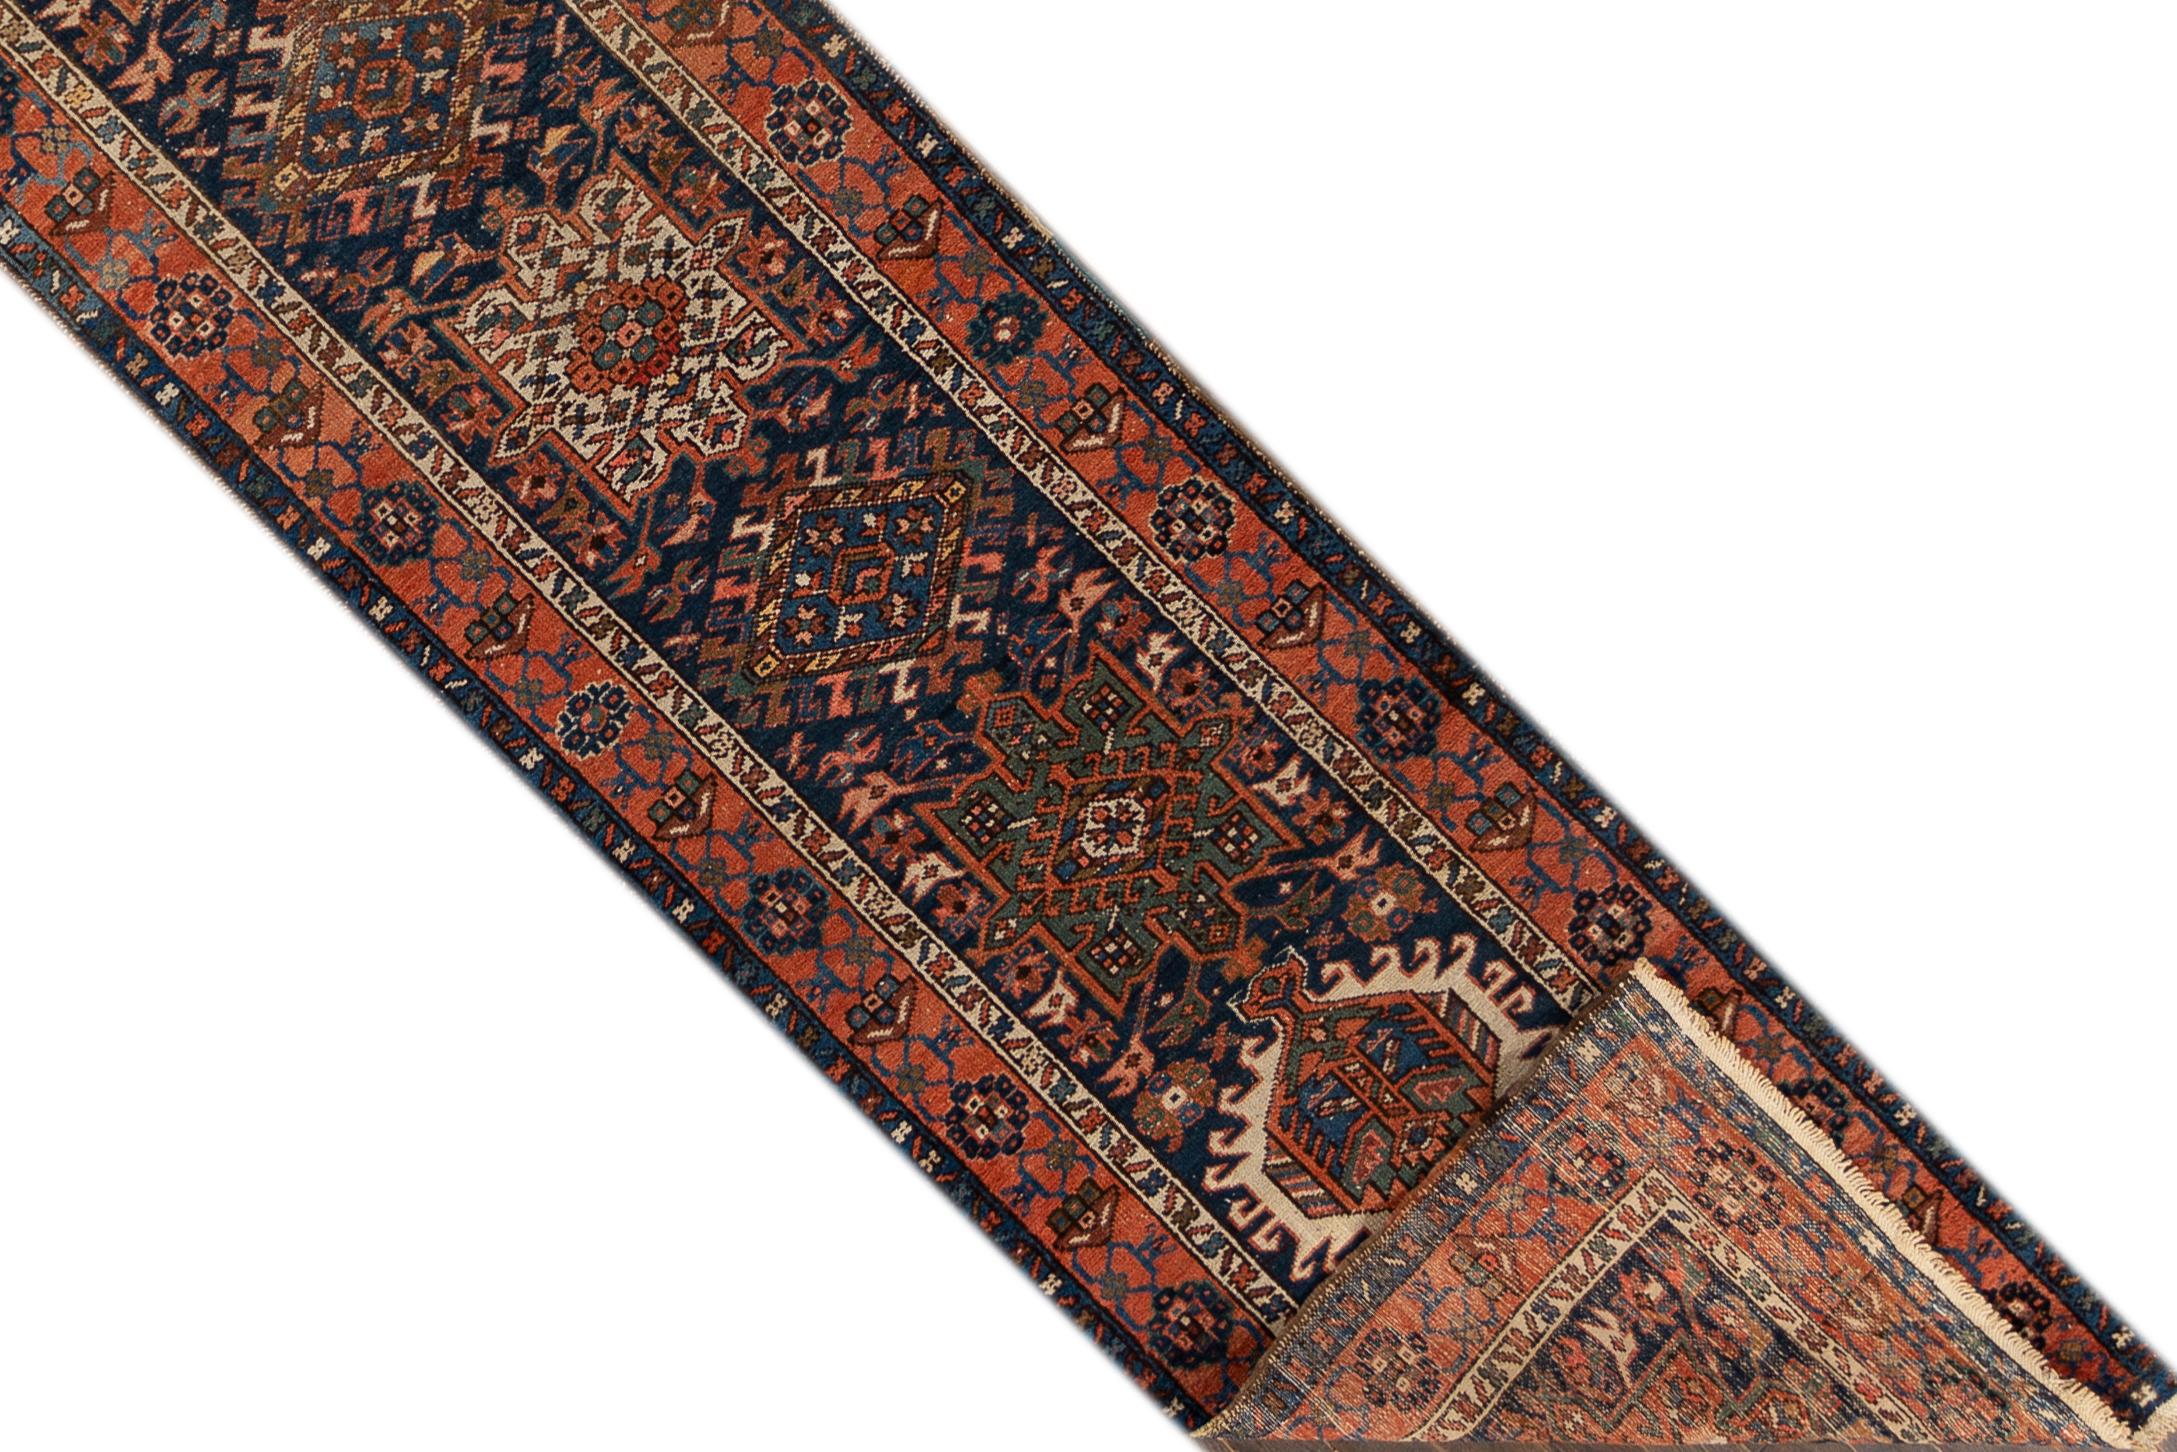 An early 20th century antique Heriz runner rug with a geometric multi medallion in an all over red and blue motif and a border. This rug measures at 2'10